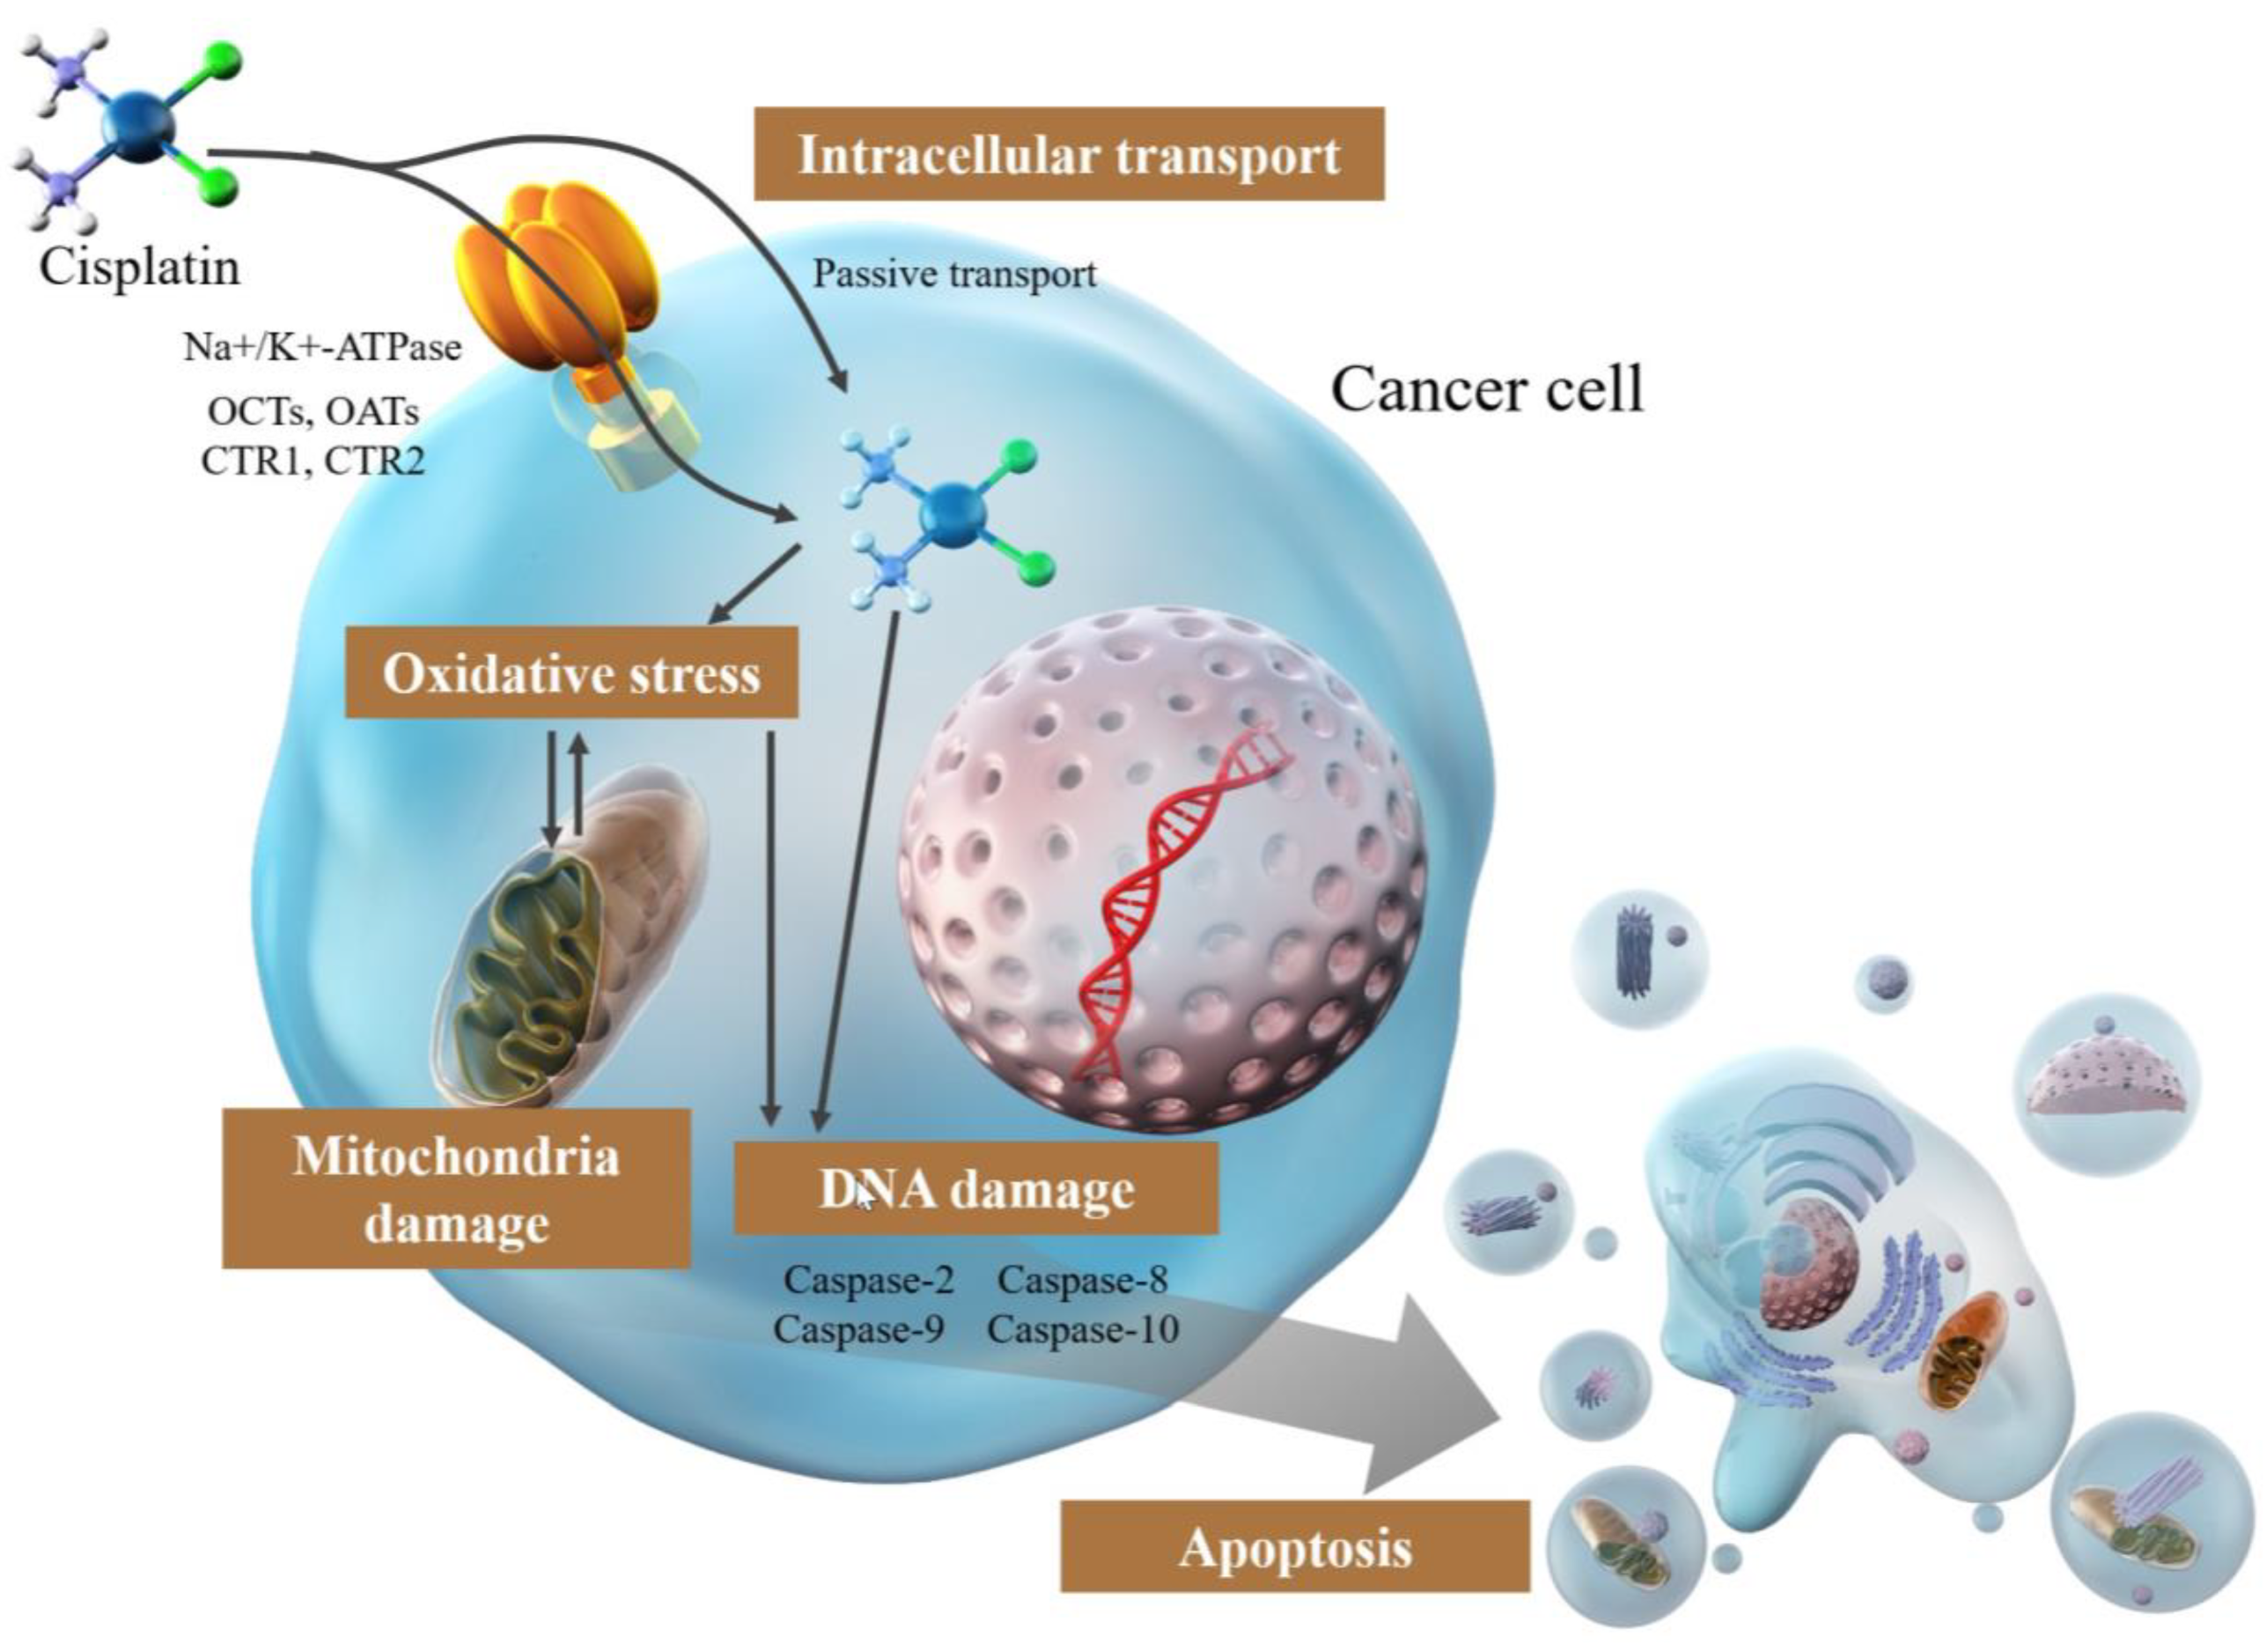 IJMS | Free Full-Text | Cisplatin in Liver Cancer Therapy